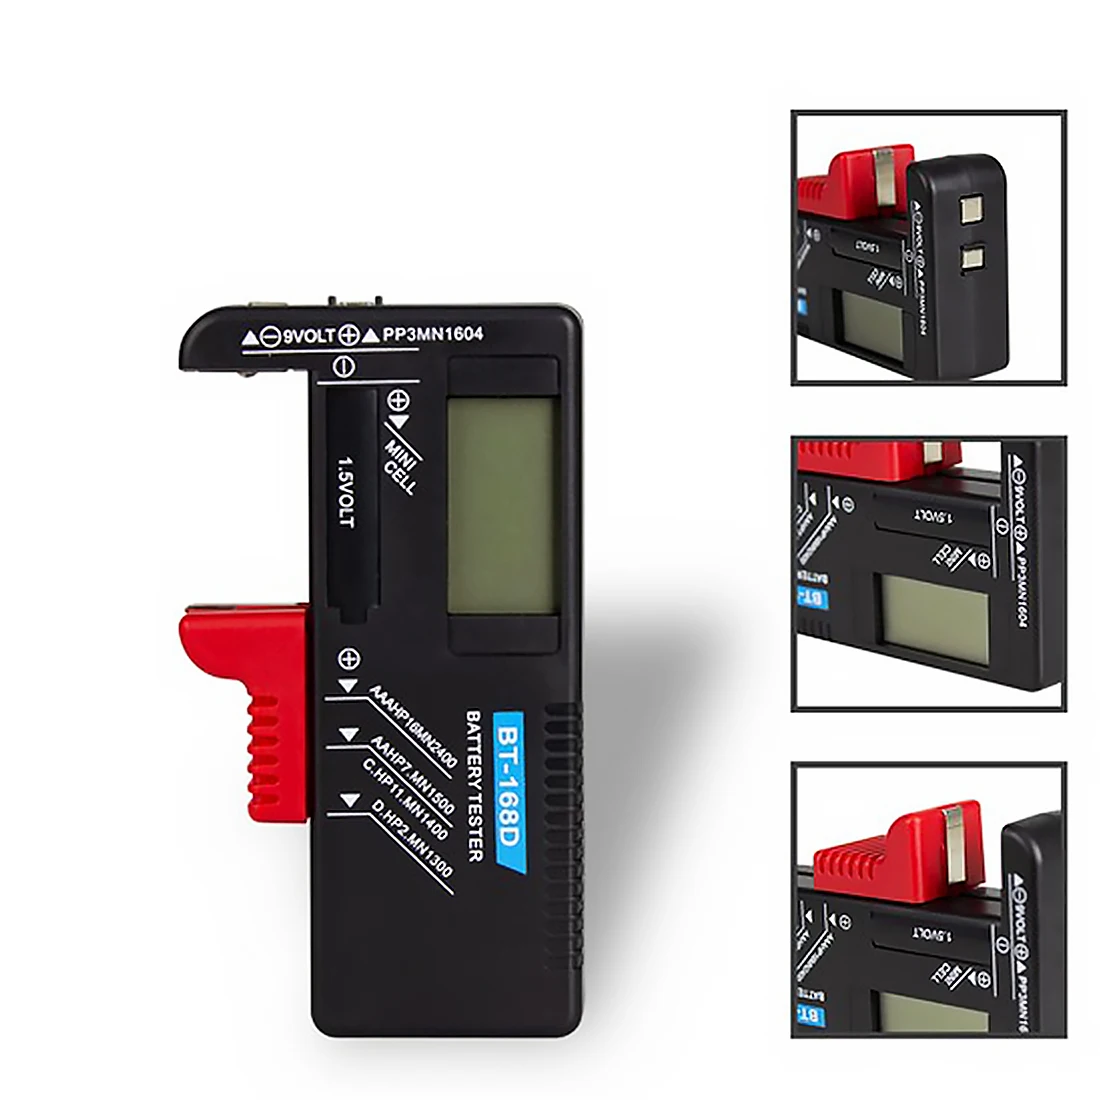 

BT-168 Universal Button Multiple Size Battery Tester For AA/AAA/C/D/9V/1.5V LCD Display Digital Battery Tester Volt Checker